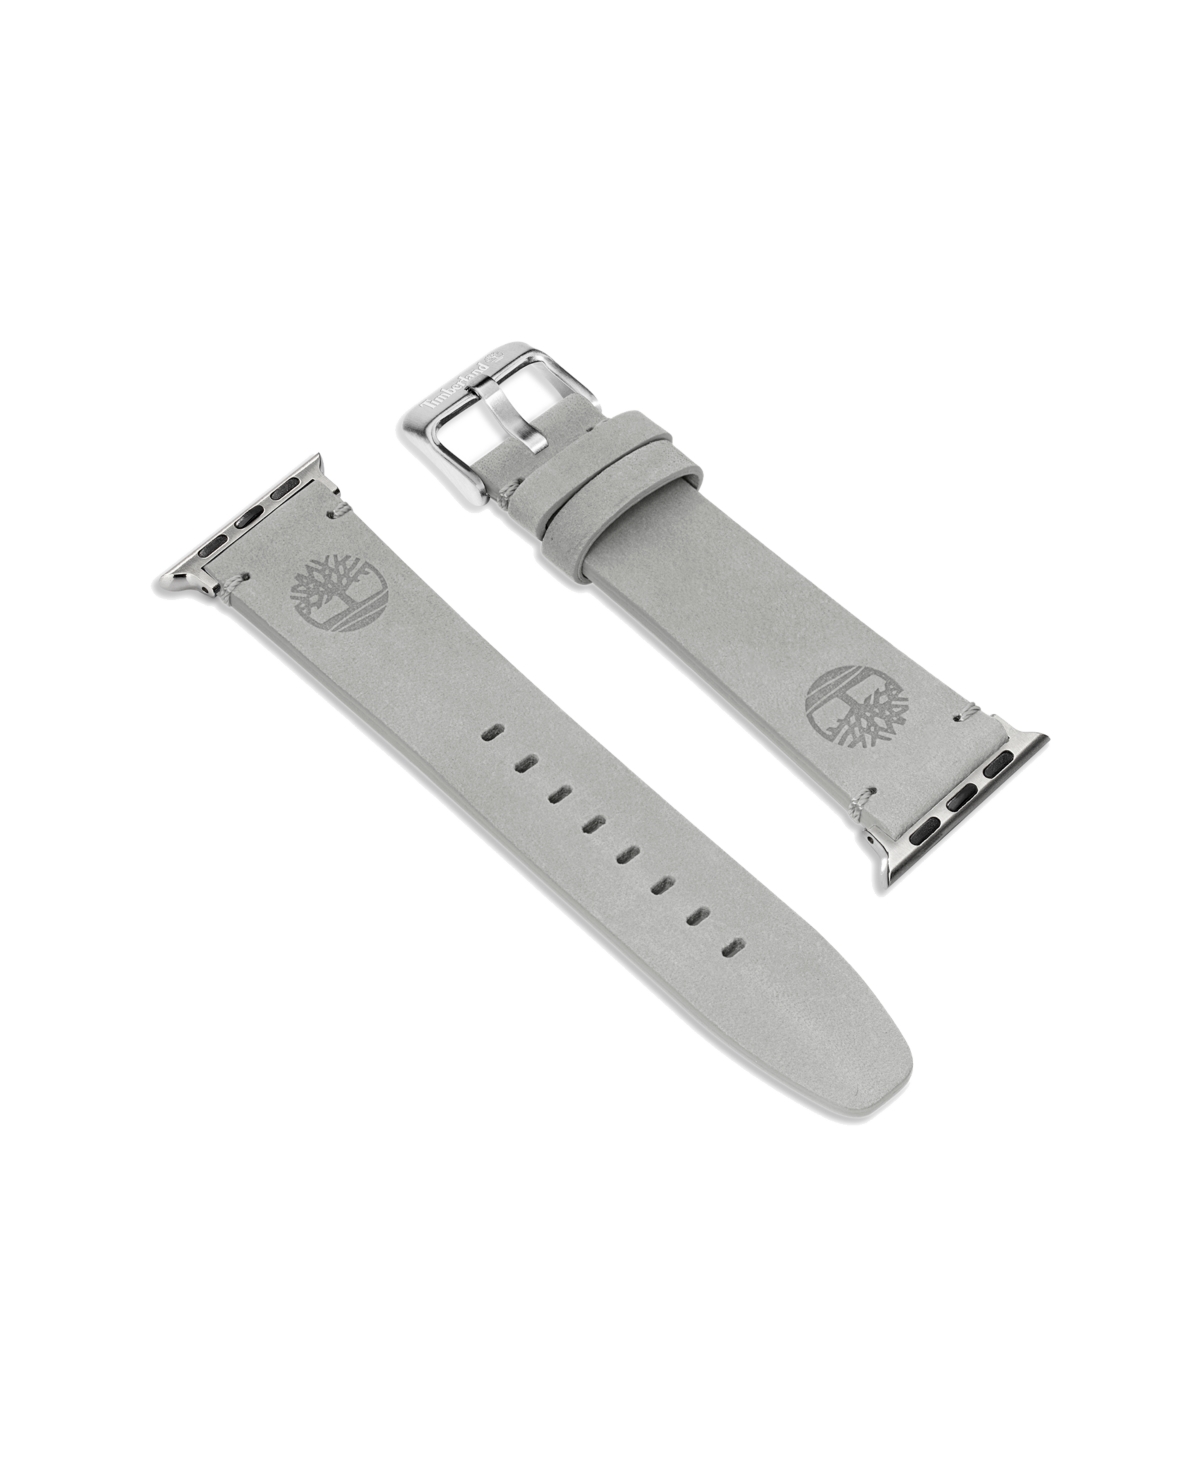 Unisex Ashby Gray Genuine Leather Universal Smart Watch Strap 20mm - Gray